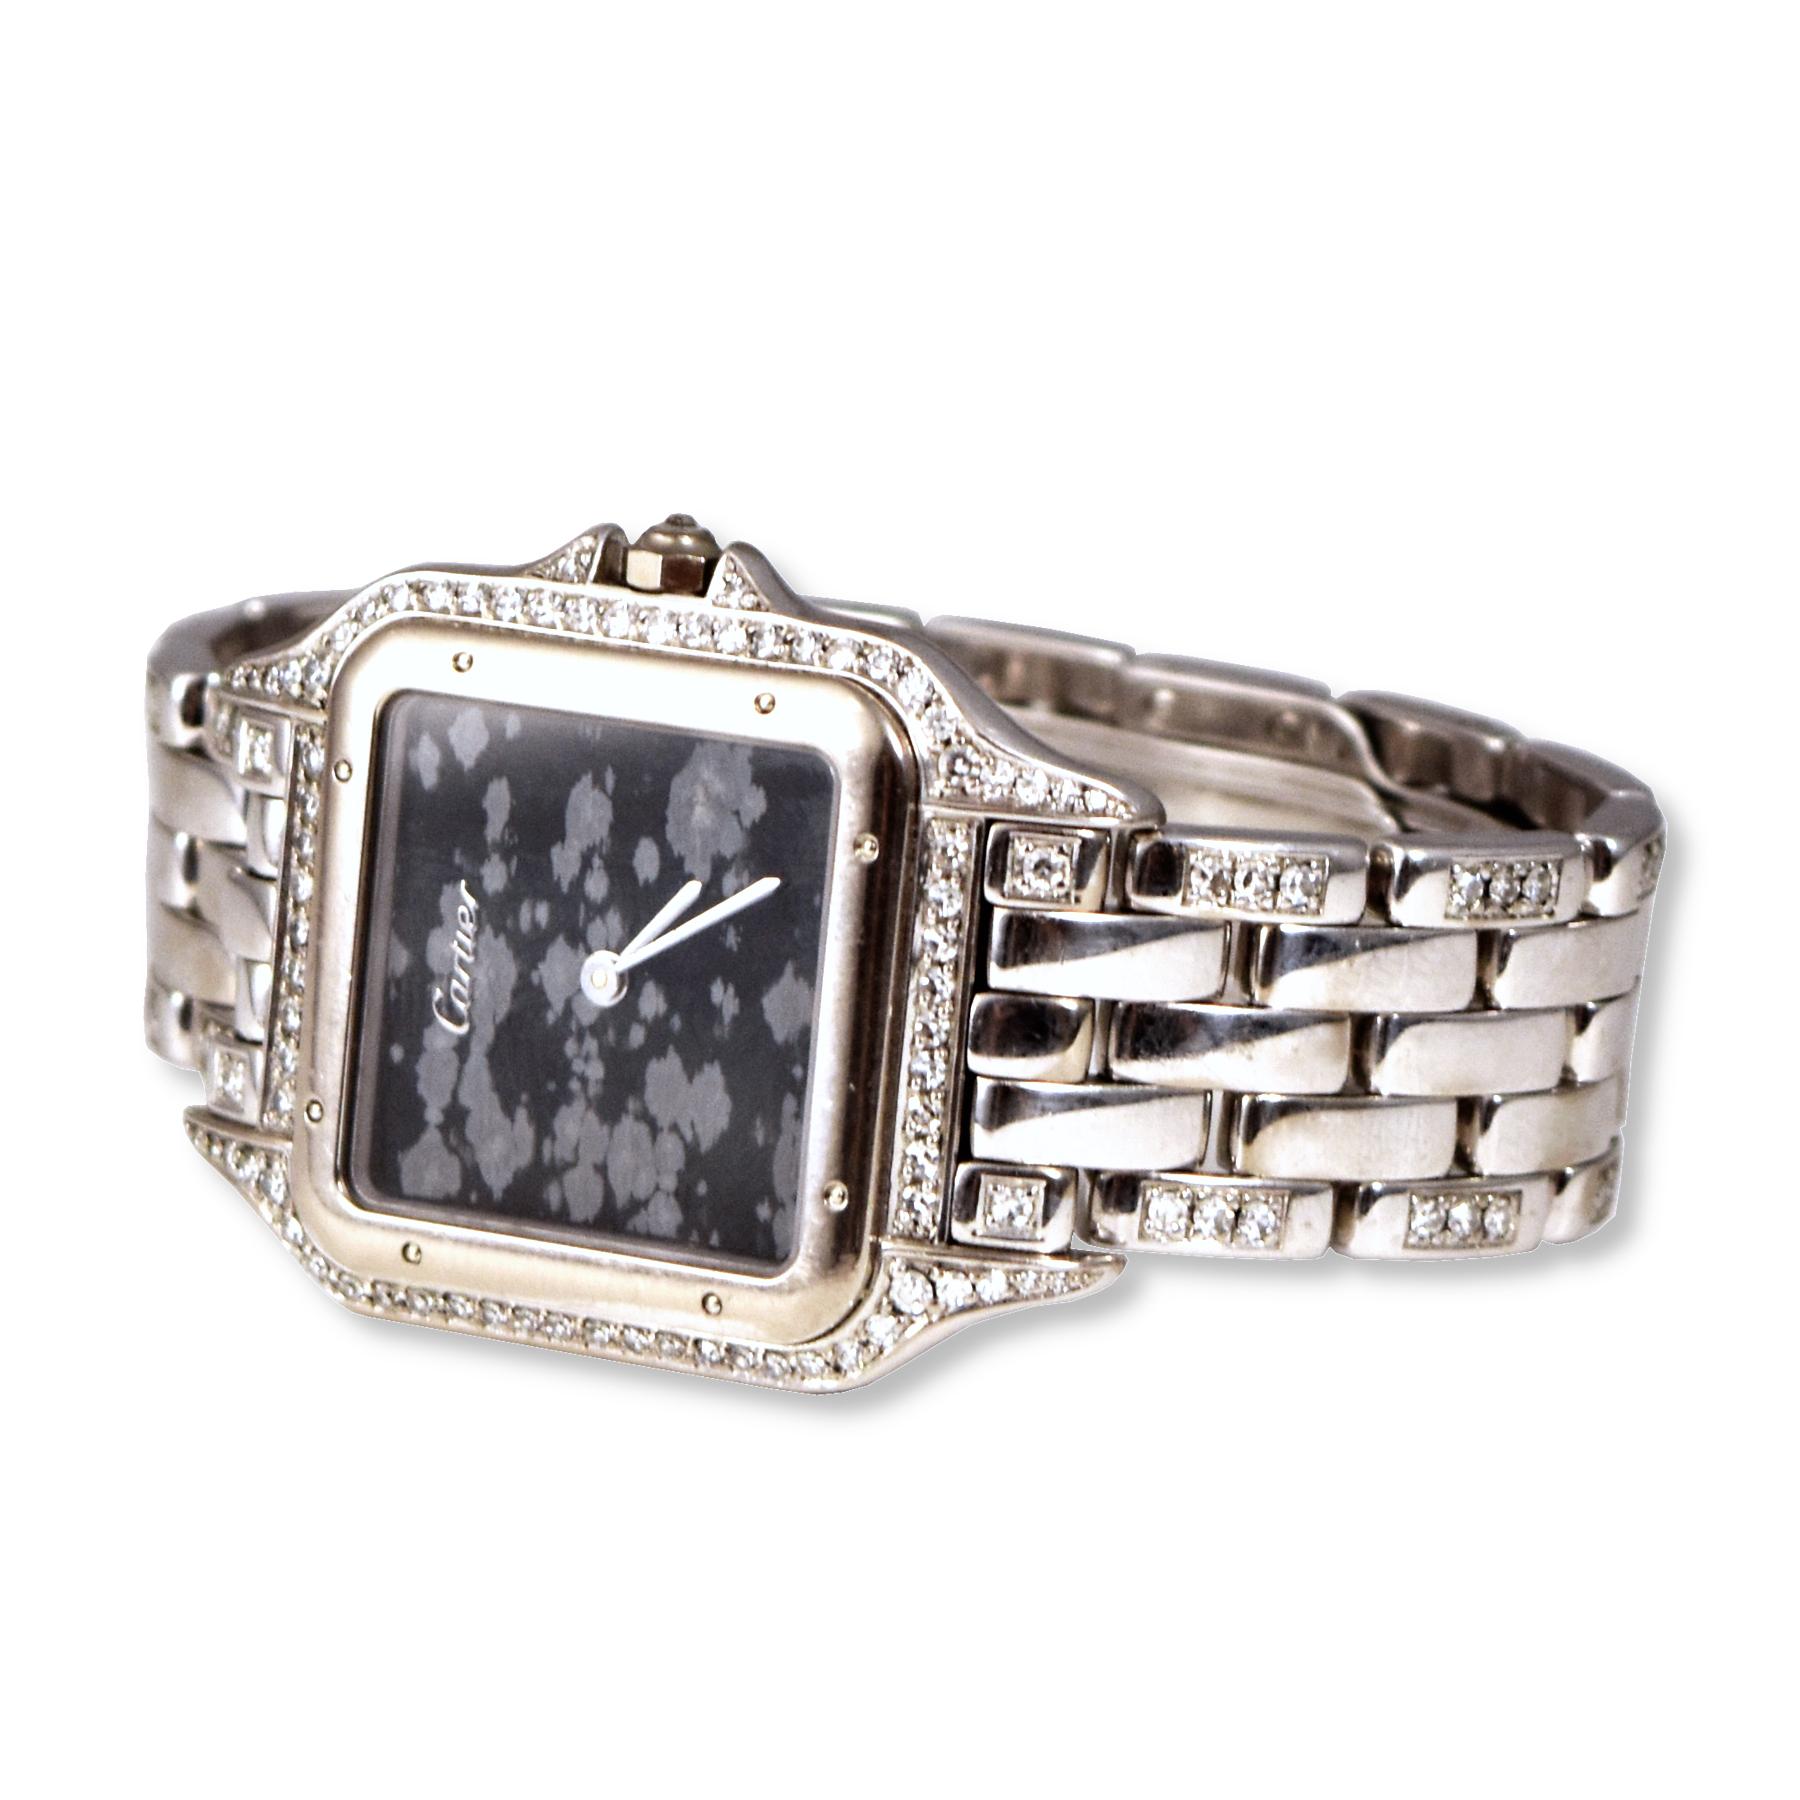 Modern Cartier Panthere Watch Marble Dial and Diamond Case in 18k White Gold For Sale